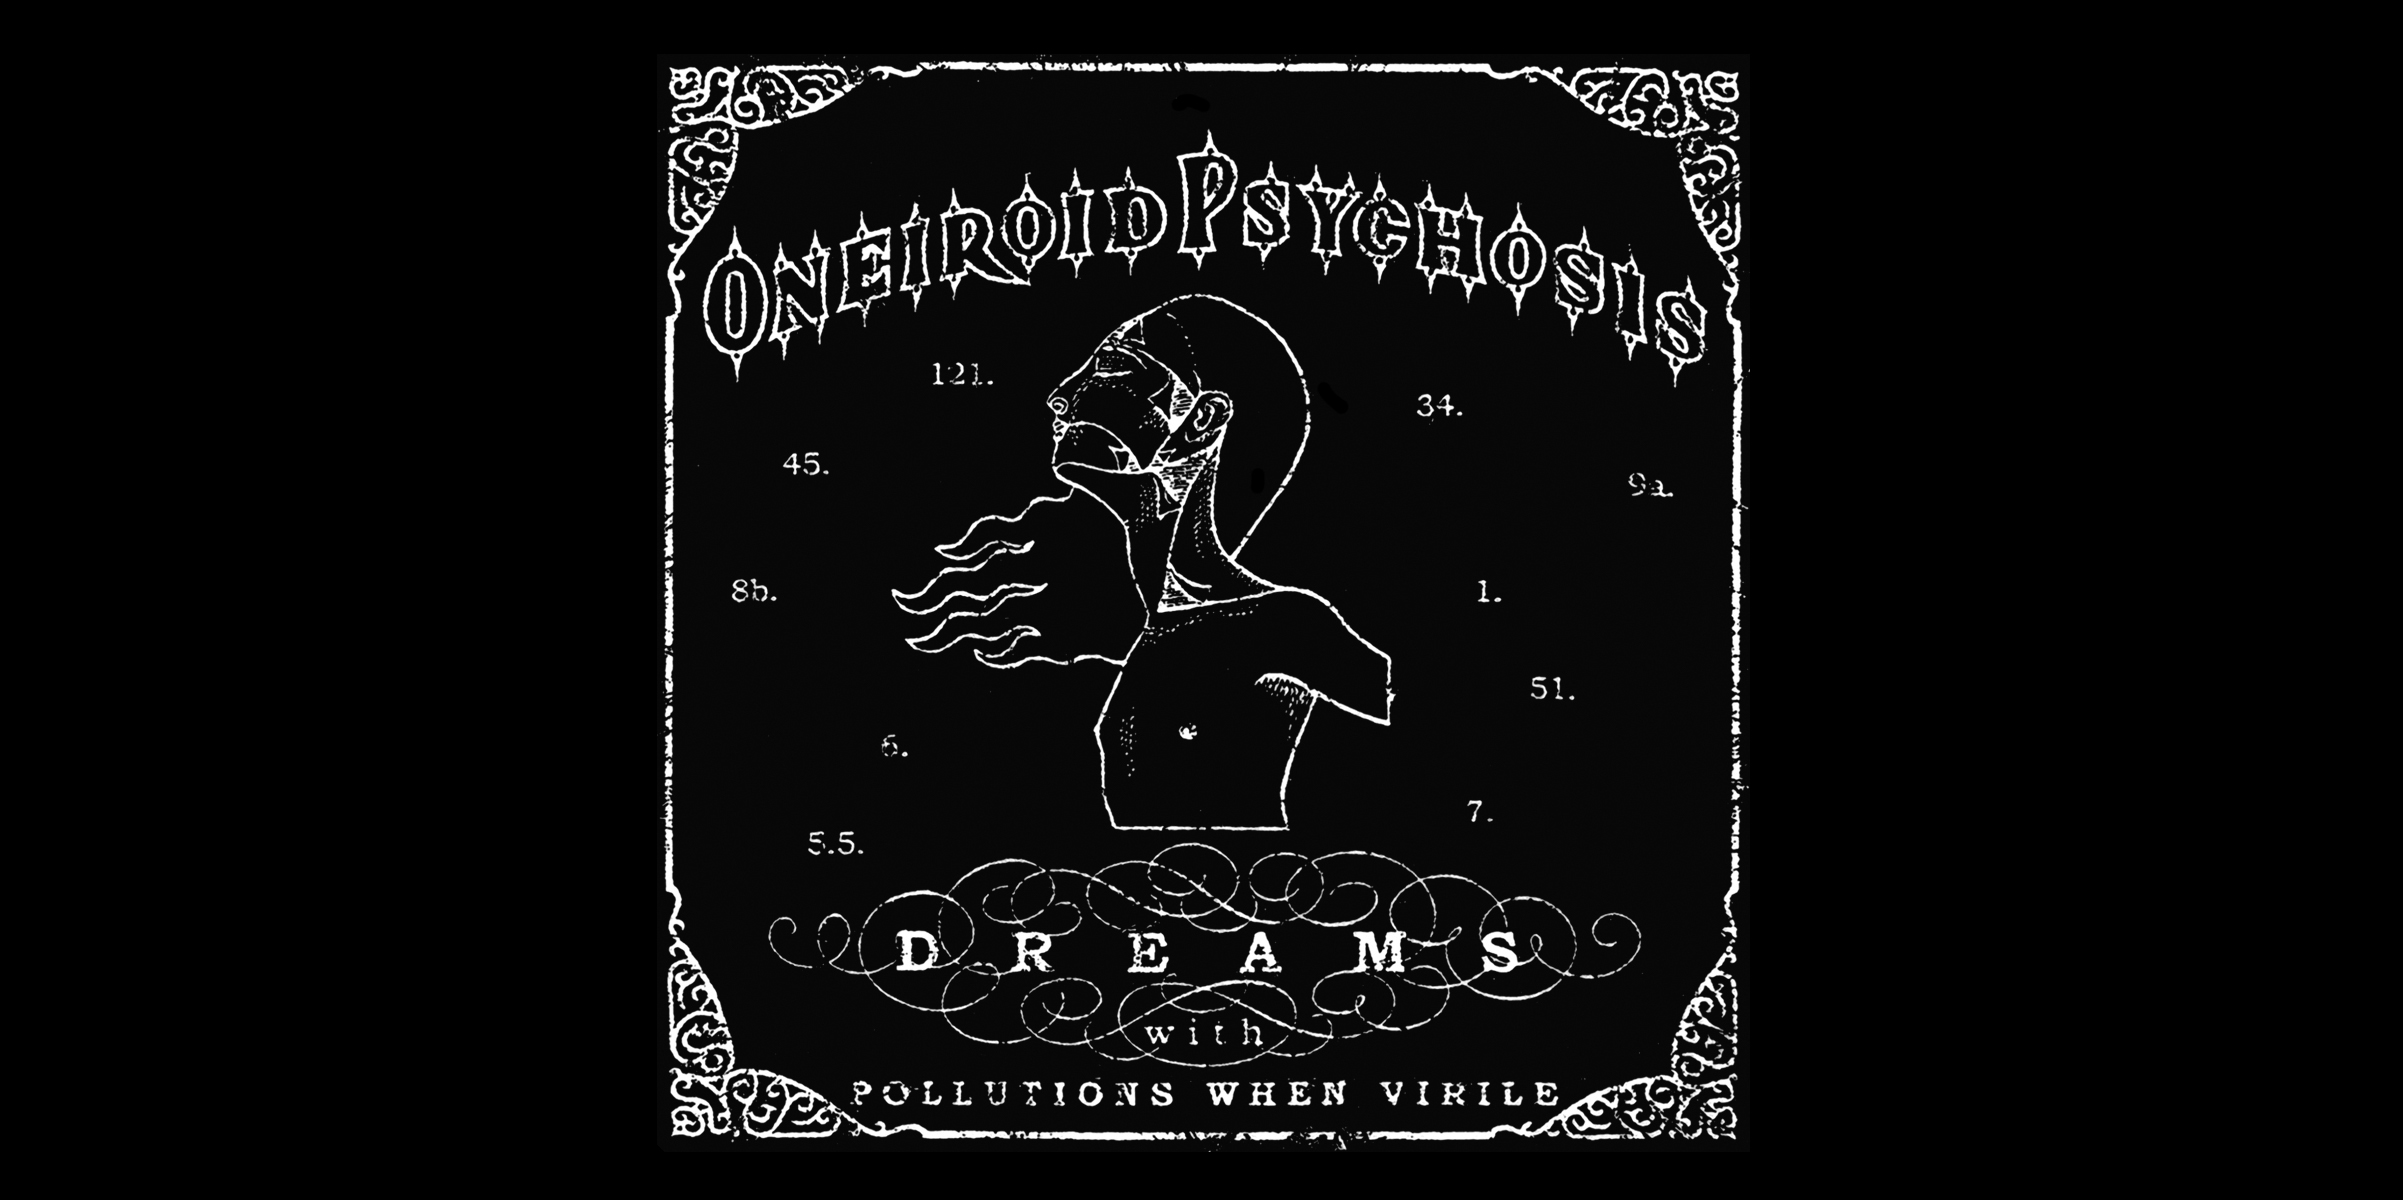   Oneiroid Psychosis,  DREAMS (with pollutions when virile),  booklet cover.  2001. Pen and ink. Printed in silver ink. Released by Cop International. 